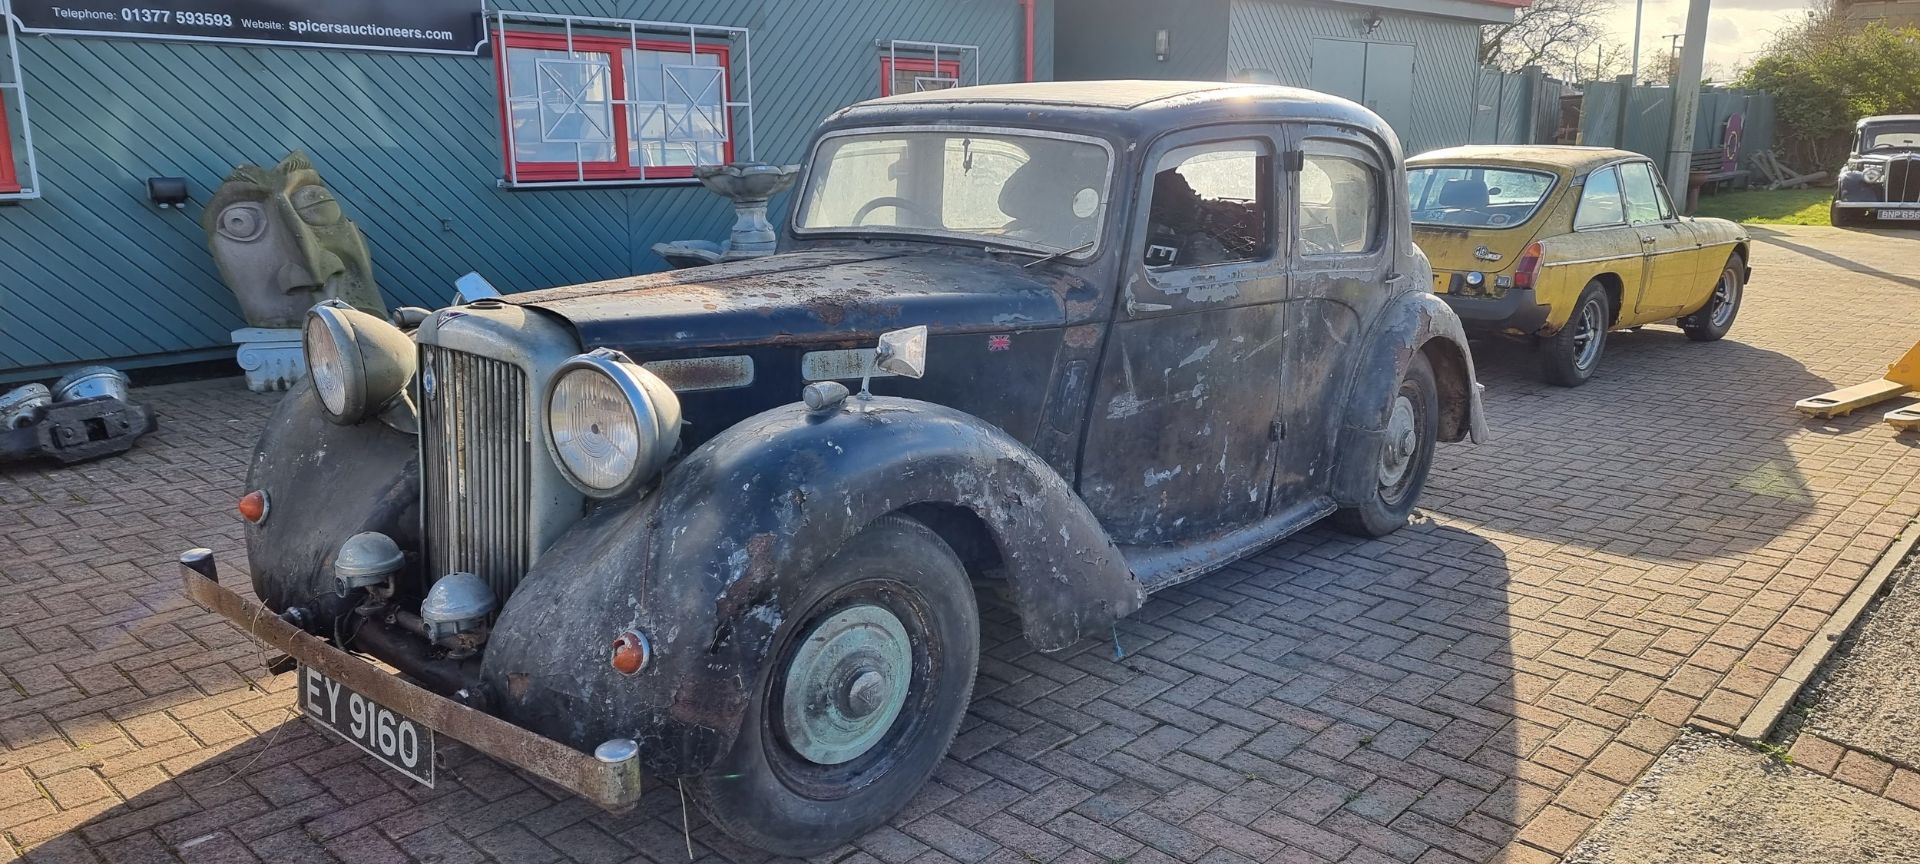 c.1949 Alvis TA14, project Registration number EY 9160 (not registered with DVLA), Chassis number - Image 2 of 14